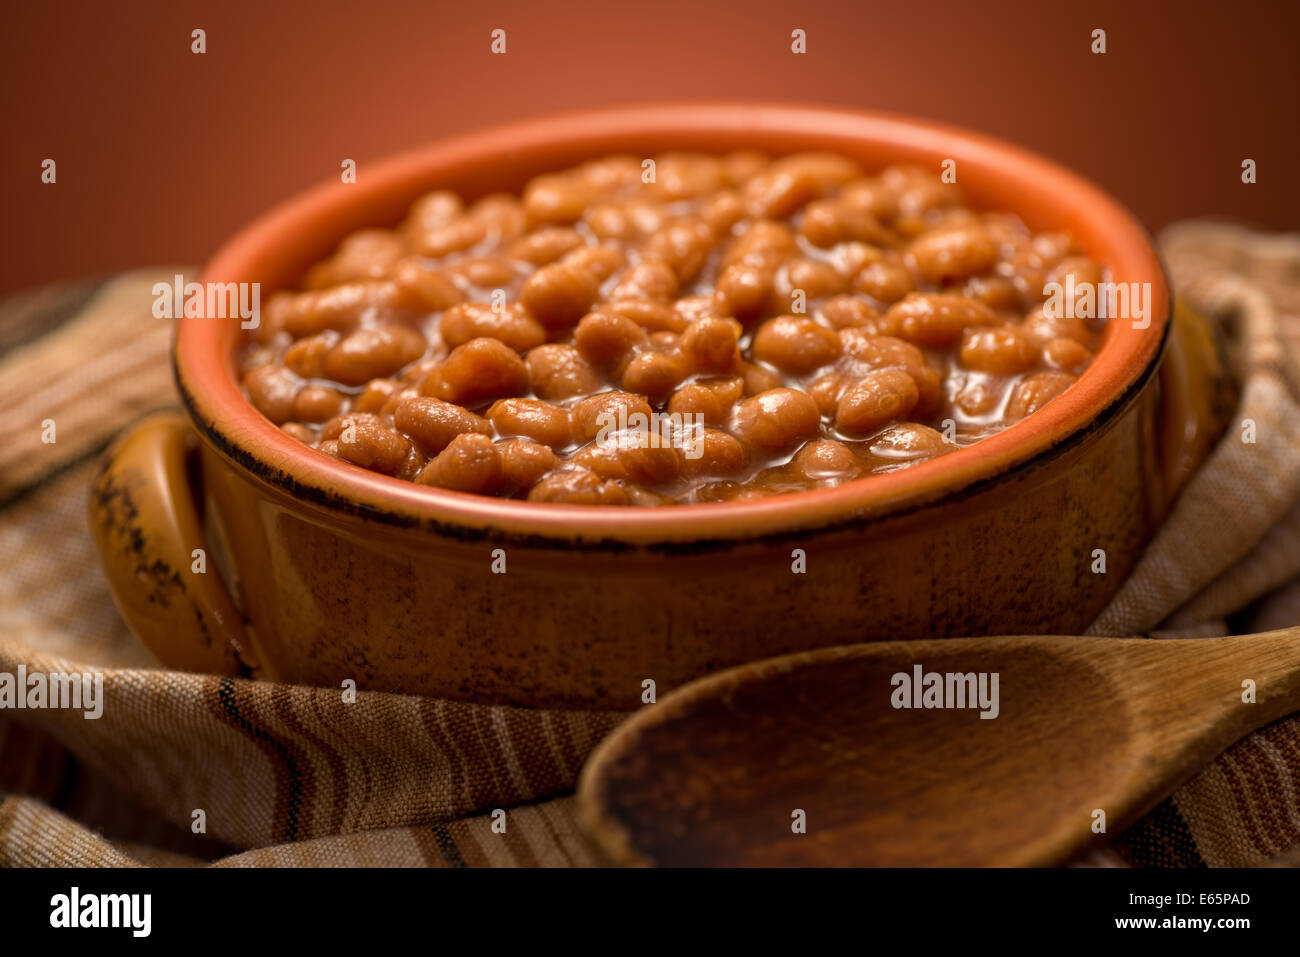 A bowl of delicious baked beans with molasses. Stock Photo